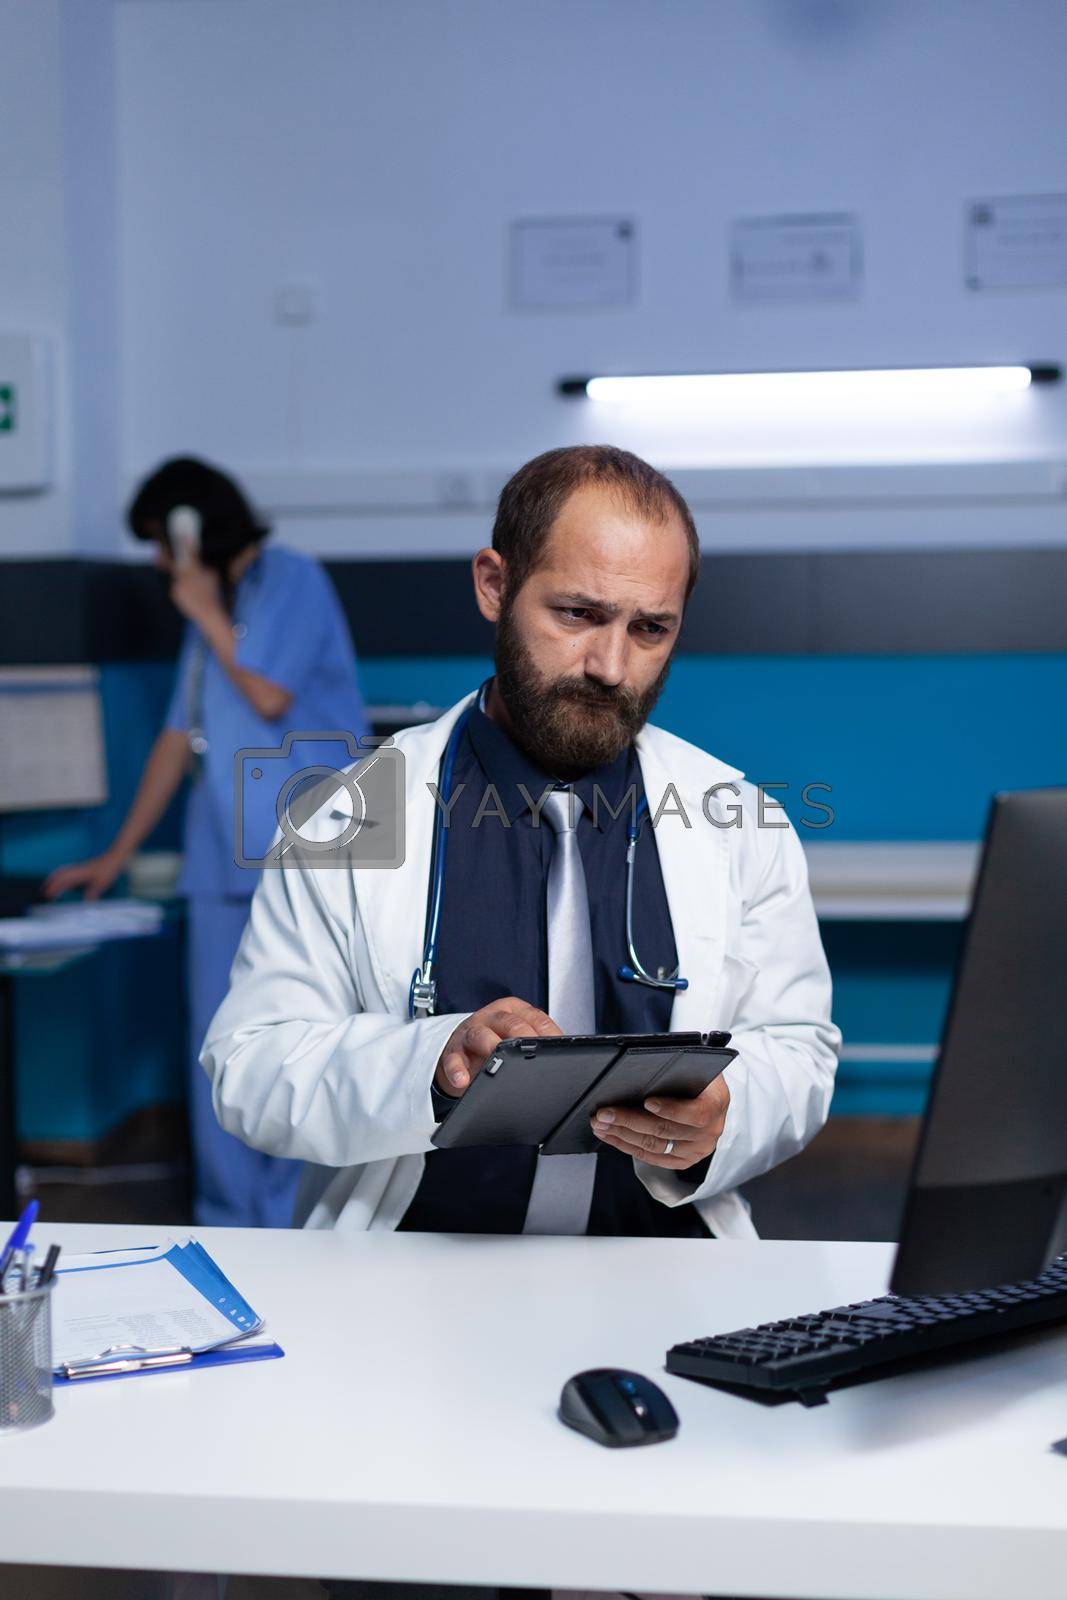 Practitioner using technology for healthcare system and medical practice at office. Doctor looking at digital tablet and computer screen for checkup information, working late at night